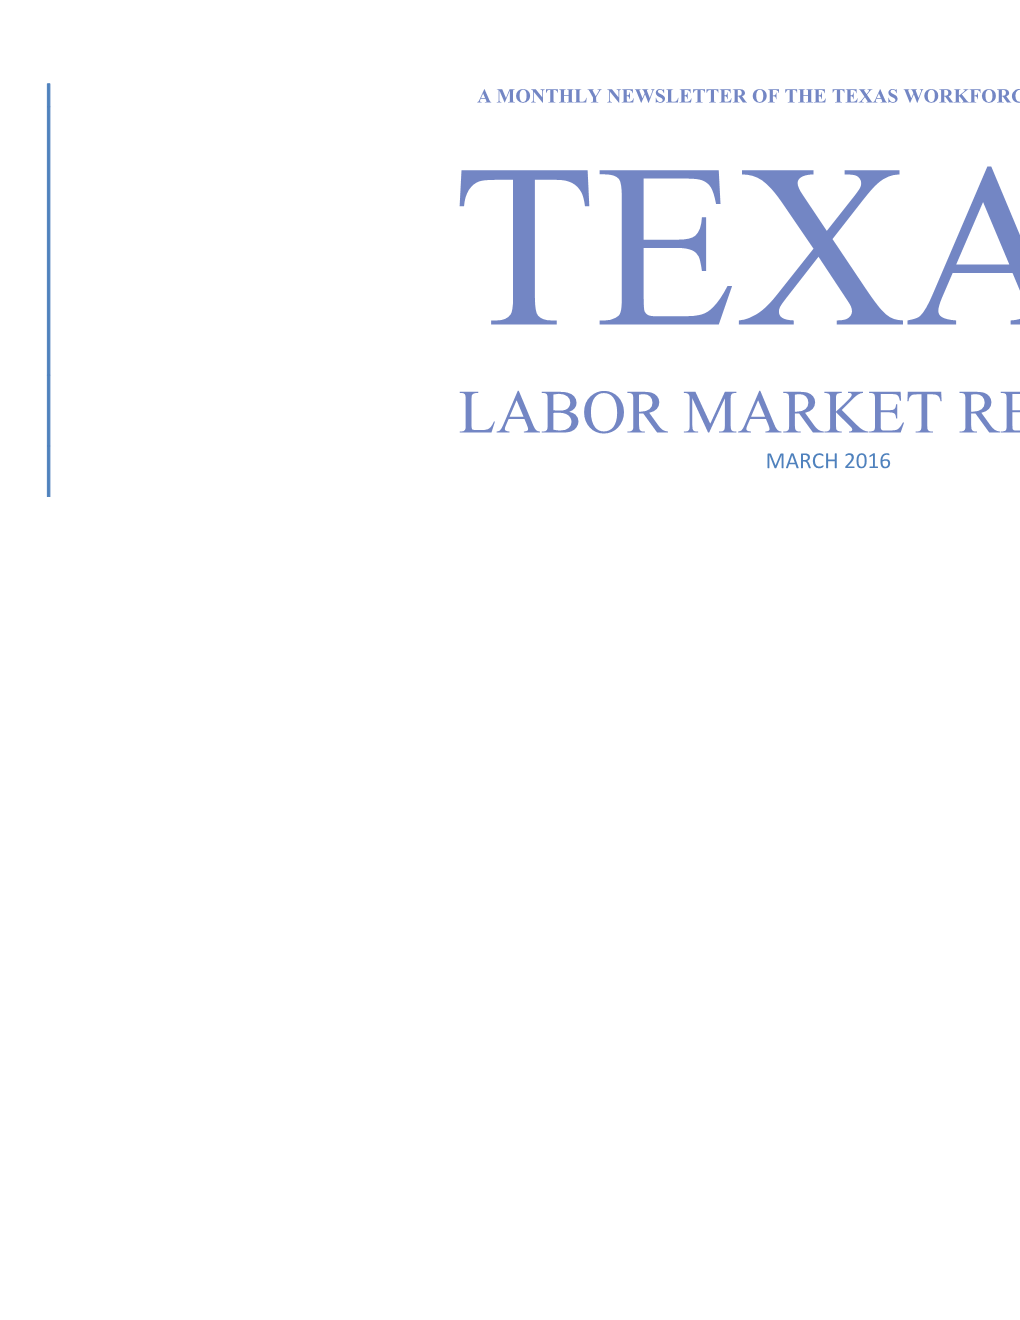 I.Texas Nonagricultural Wage and Salary Employment (Seasonally Adjusted)